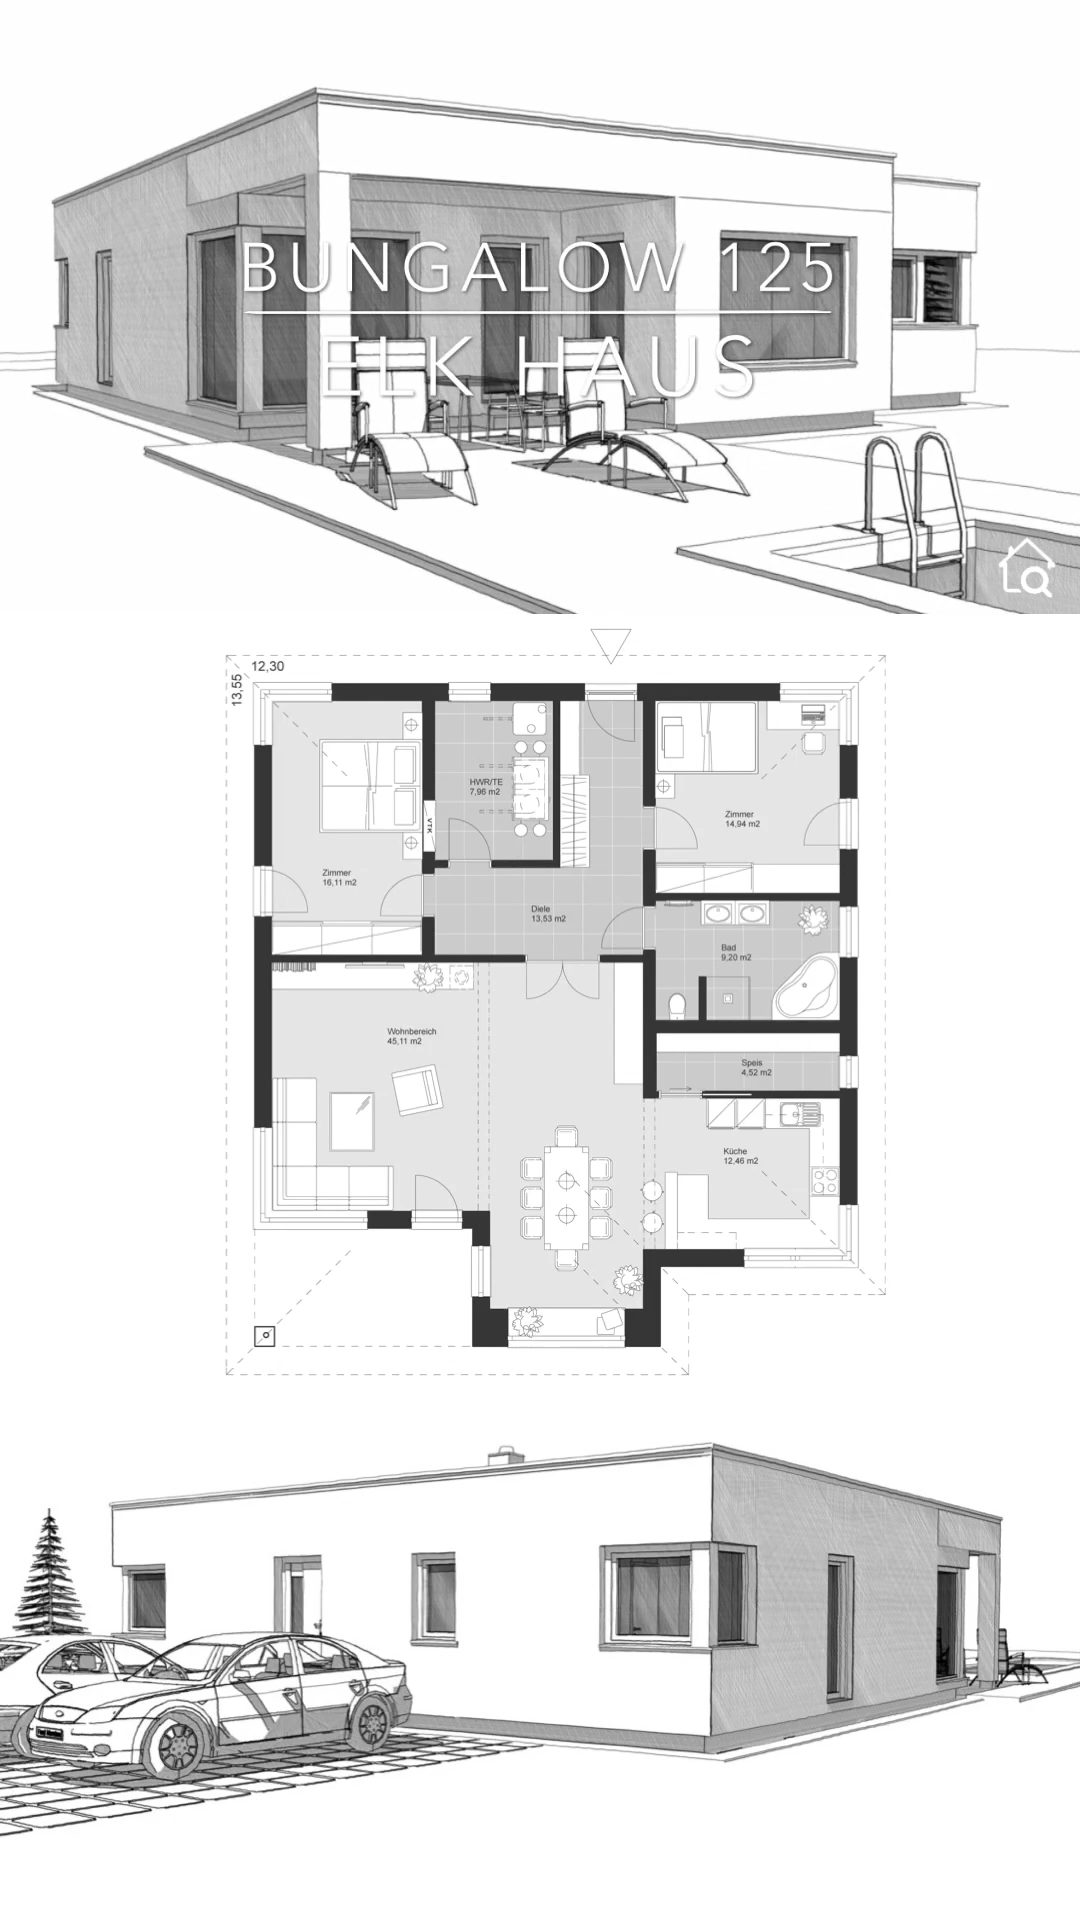 Bungalow House Floor Plans One Level Modern Architecture Design & Dream Home Ideas with Flat Roof - Bungalow House Floor Plans One Level Modern Architecture Design & Dream Home Ideas with Flat Roof -   17 diy House floor ideas